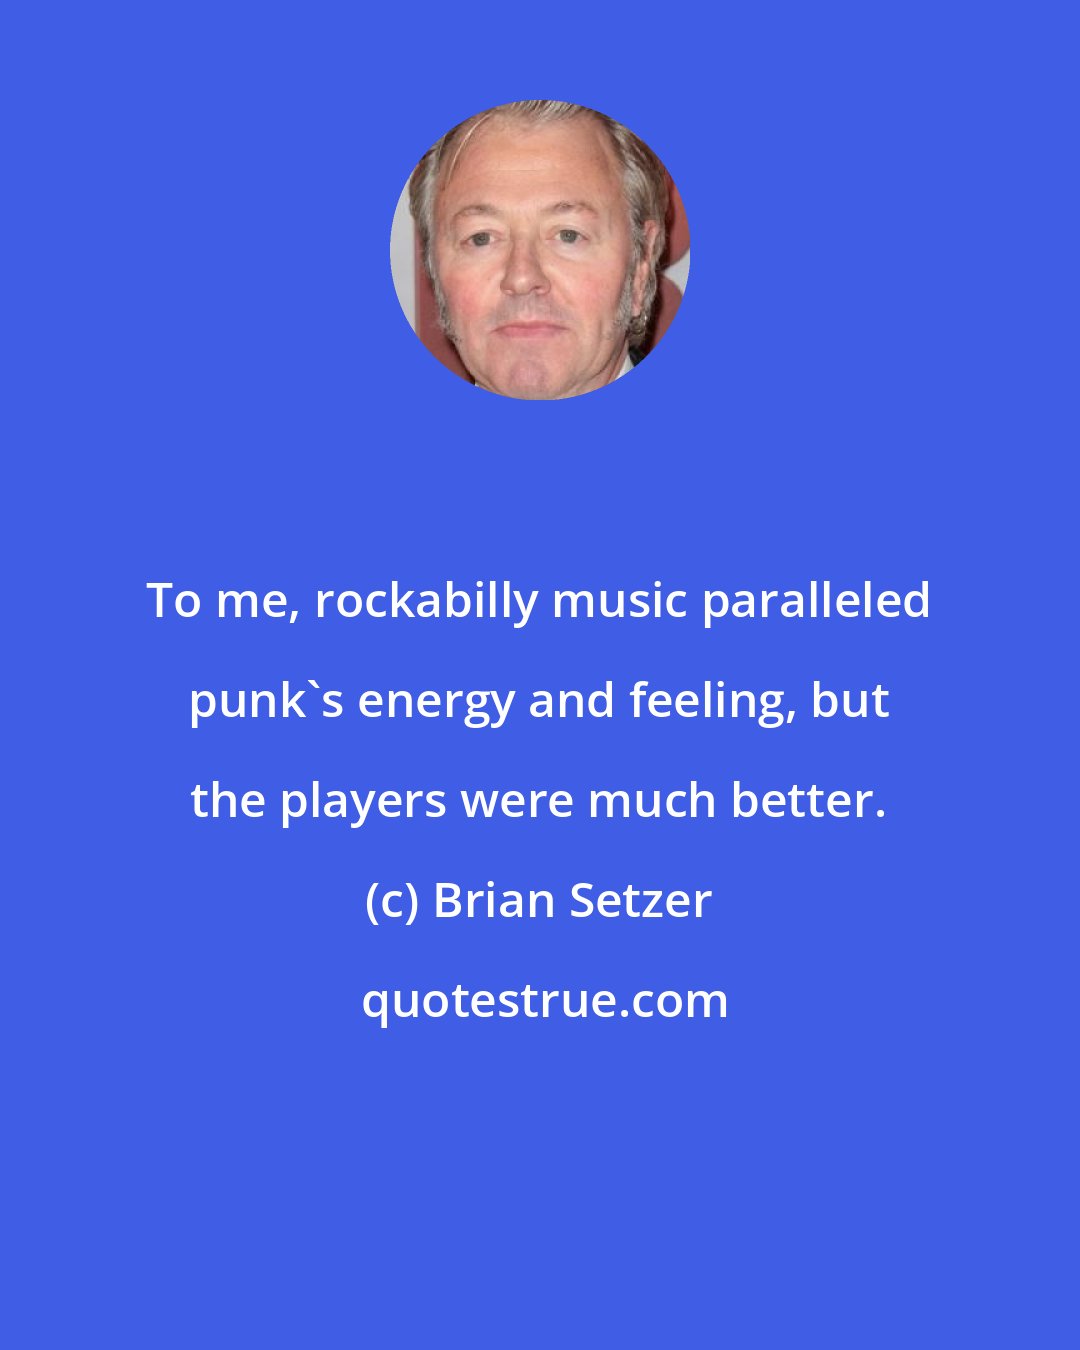 Brian Setzer: To me, rockabilly music paralleled punk's energy and feeling, but the players were much better.